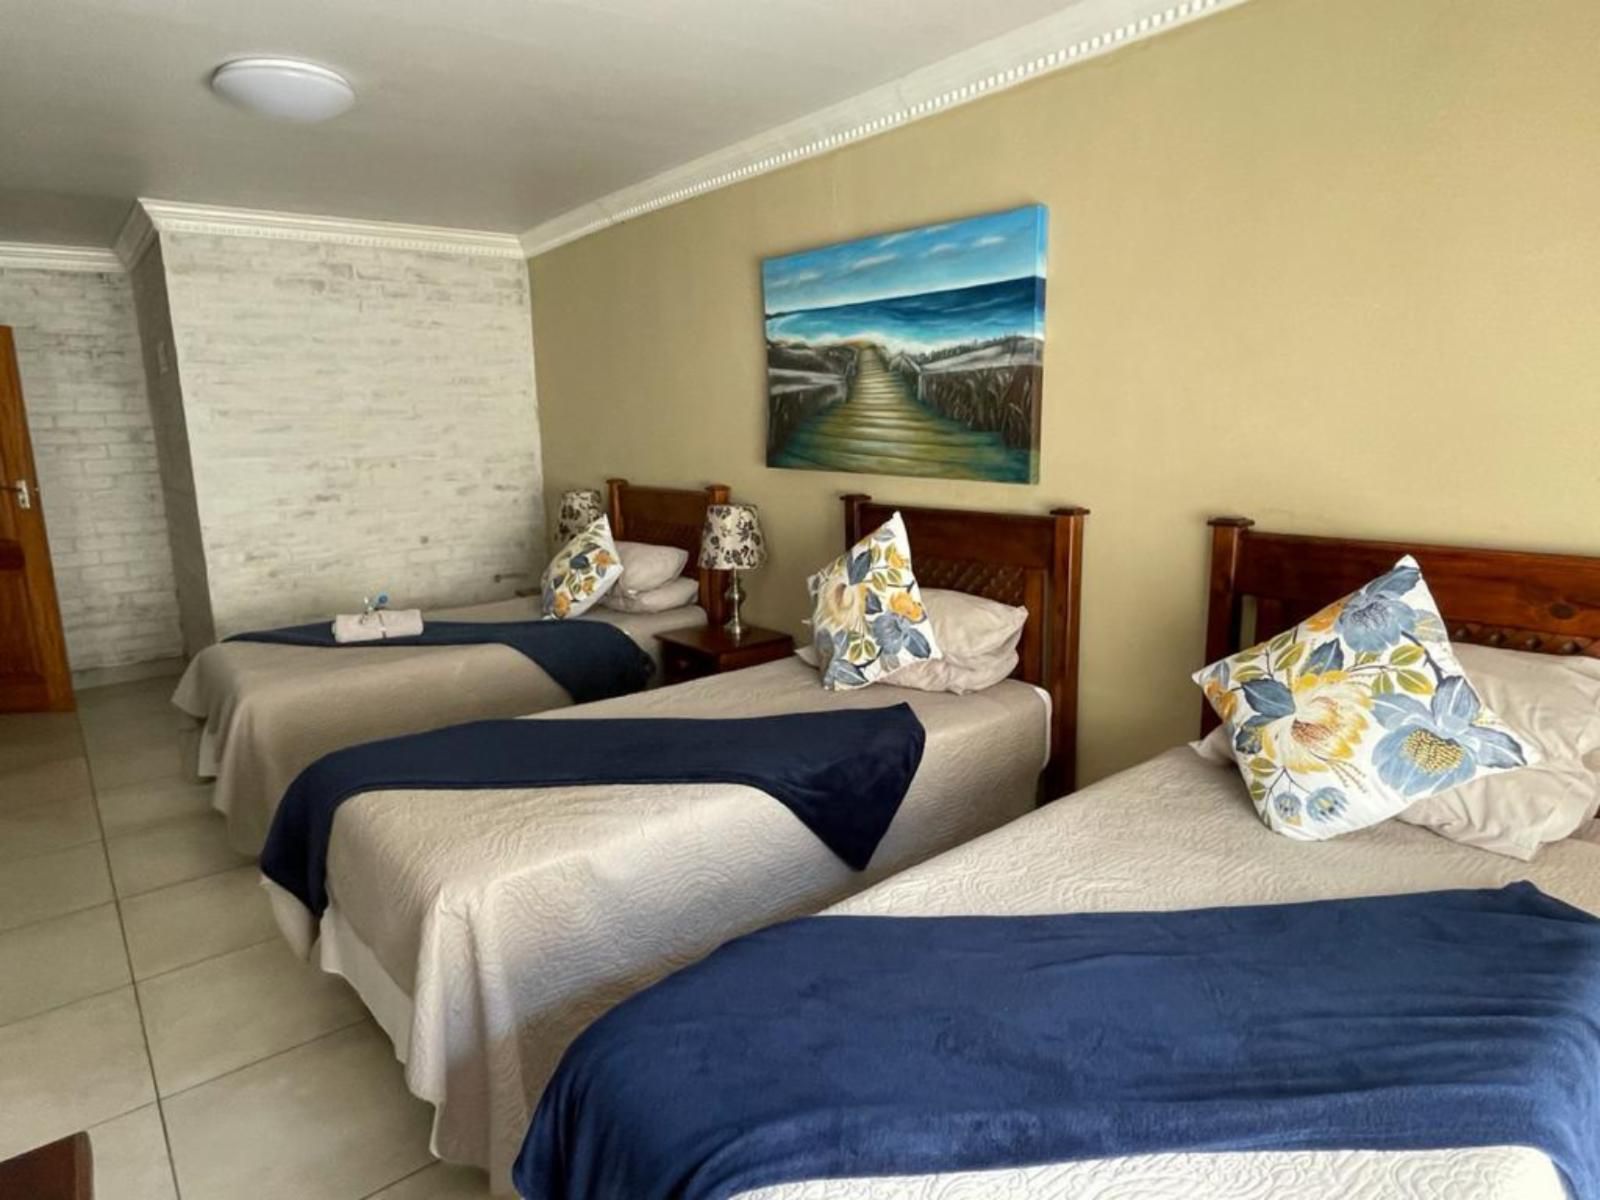 Maroela Guesthouse Brits Brits North West Province South Africa Bedroom